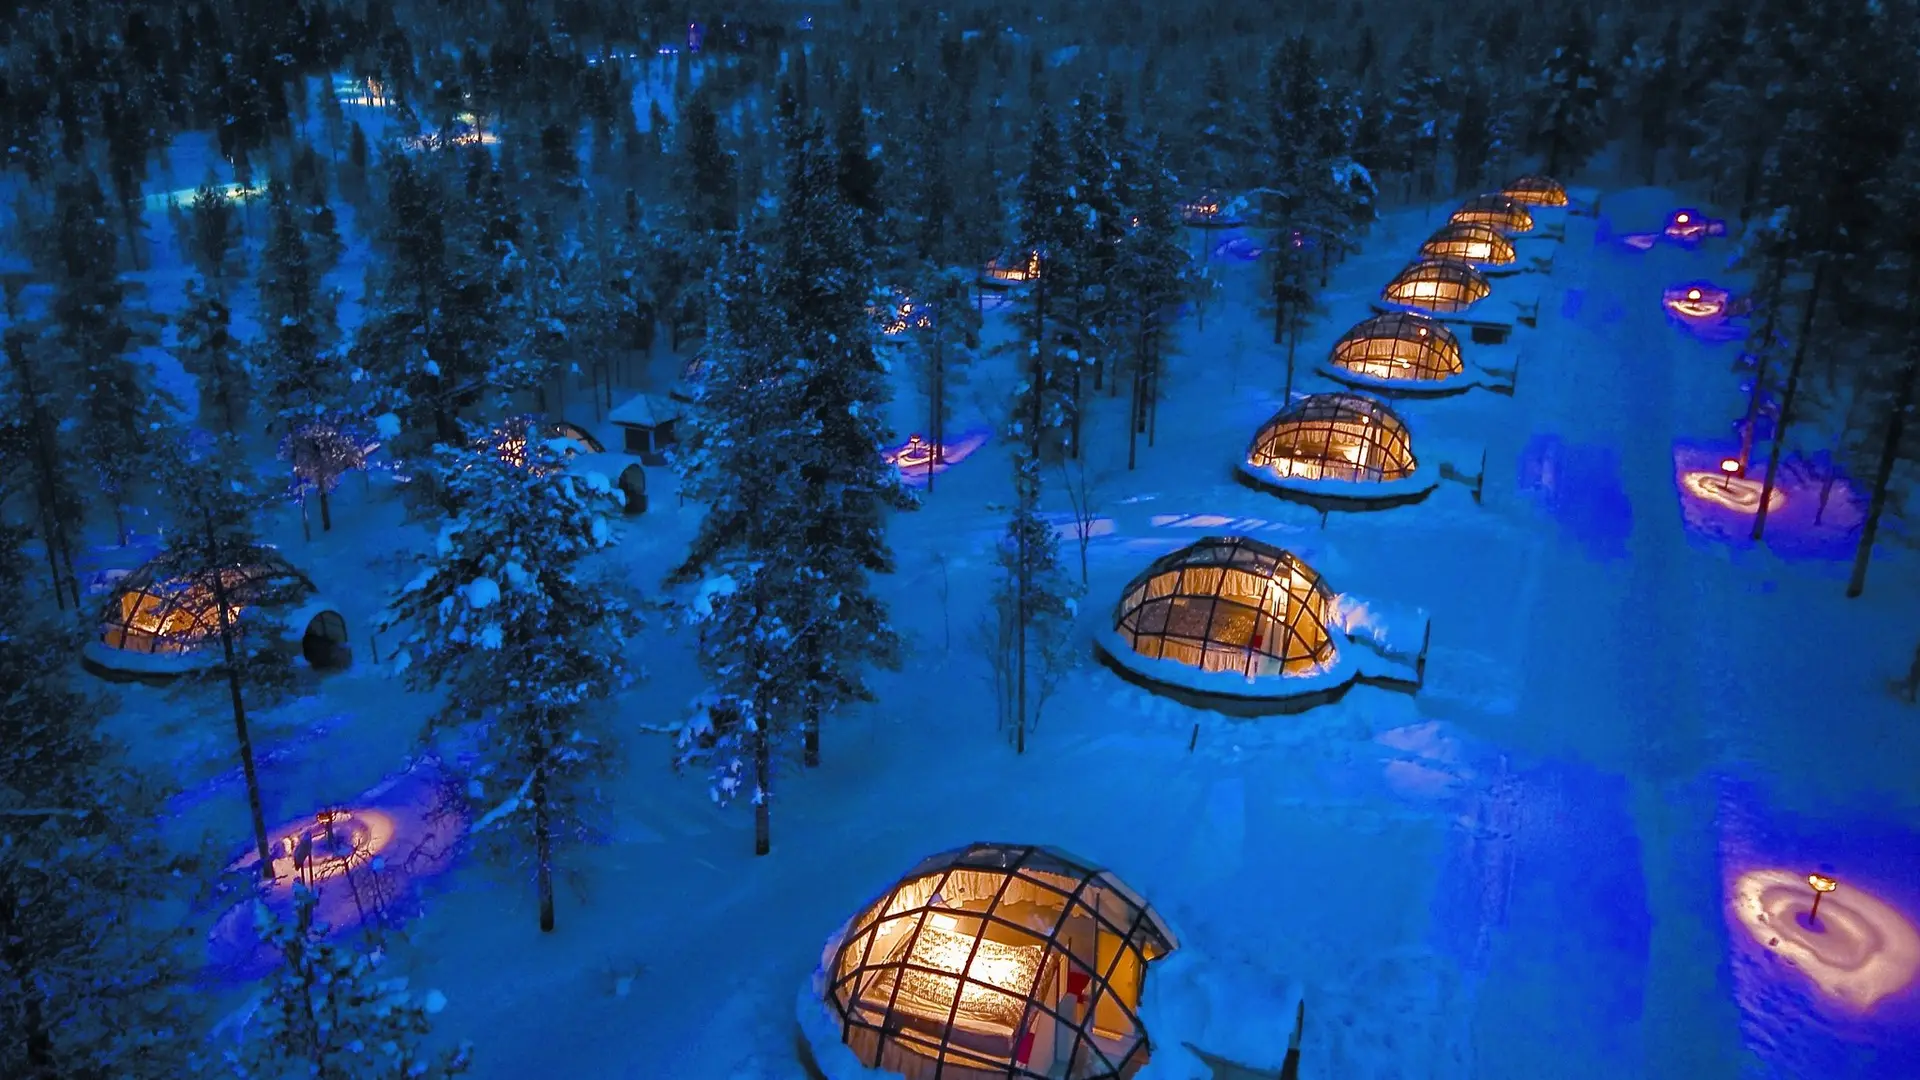 Hotel review Location' - Kakslauttanen Arctic Resort - Igloos and Chalets - 0